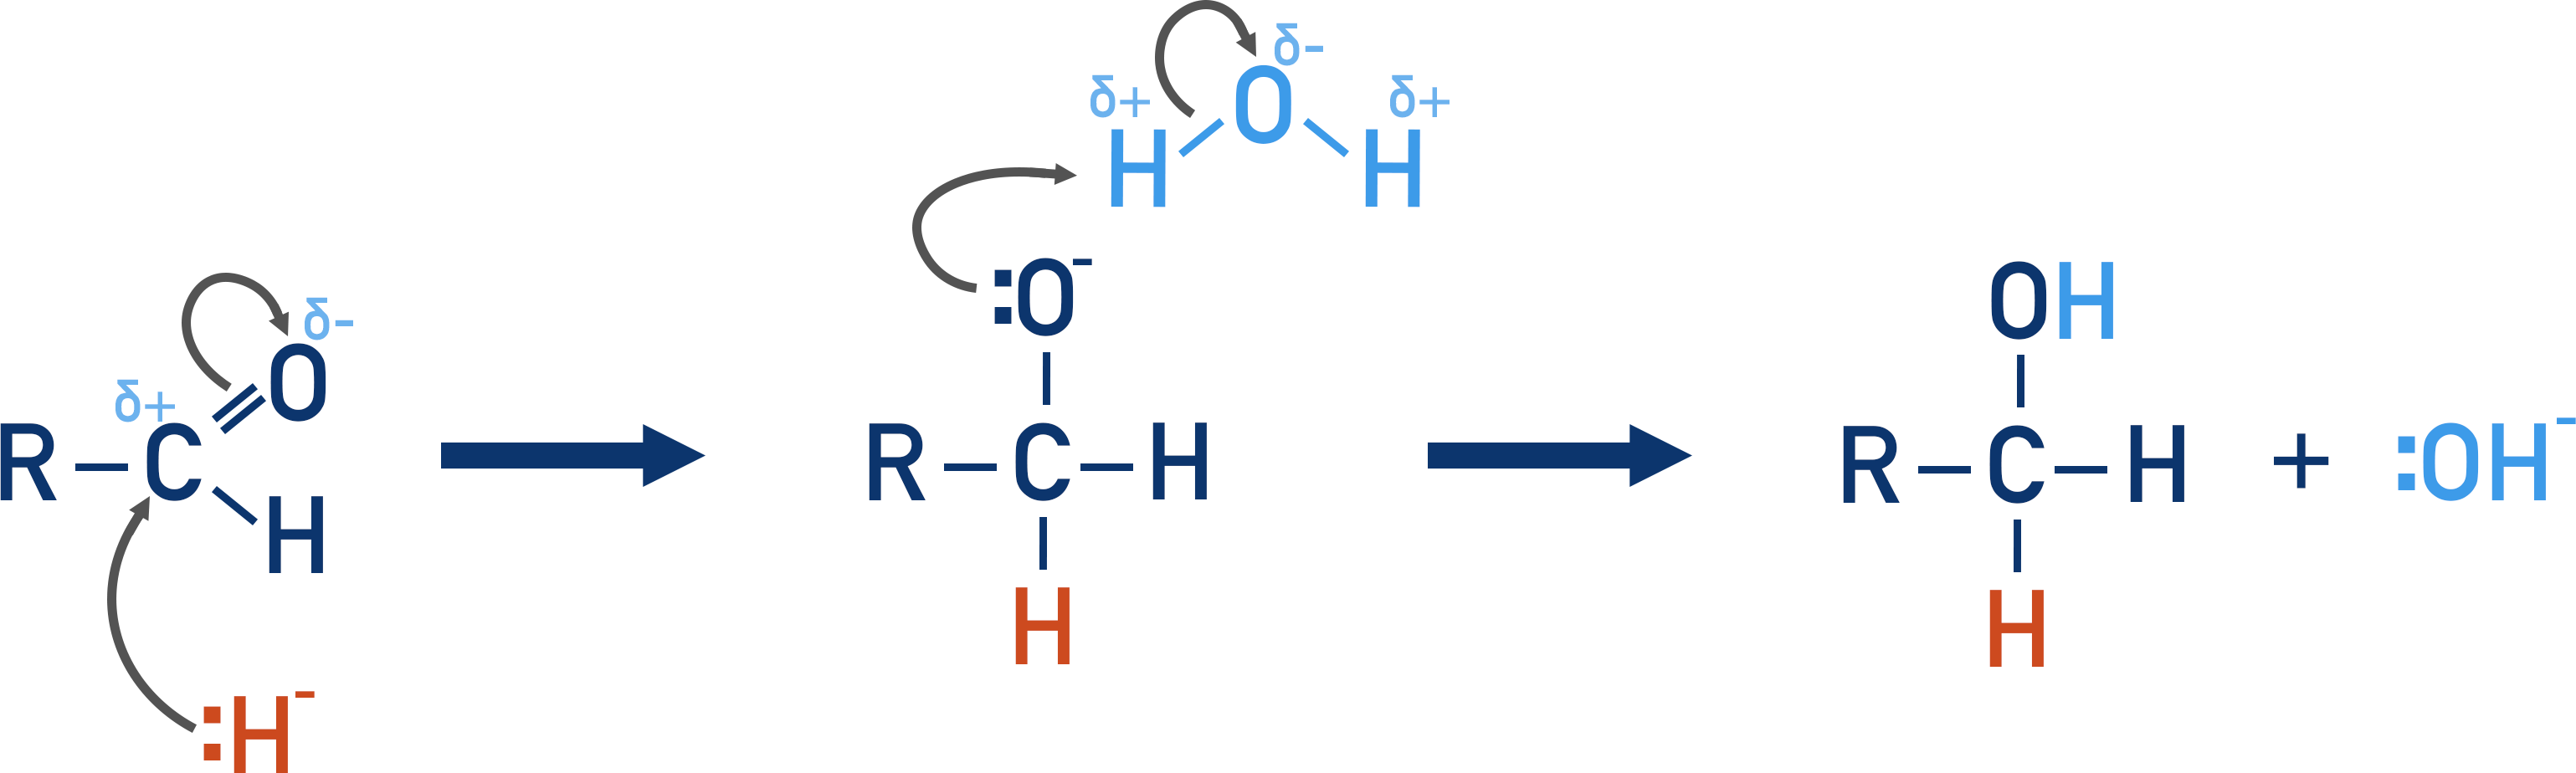 reduction of carbonyl mechanism forming alcohol